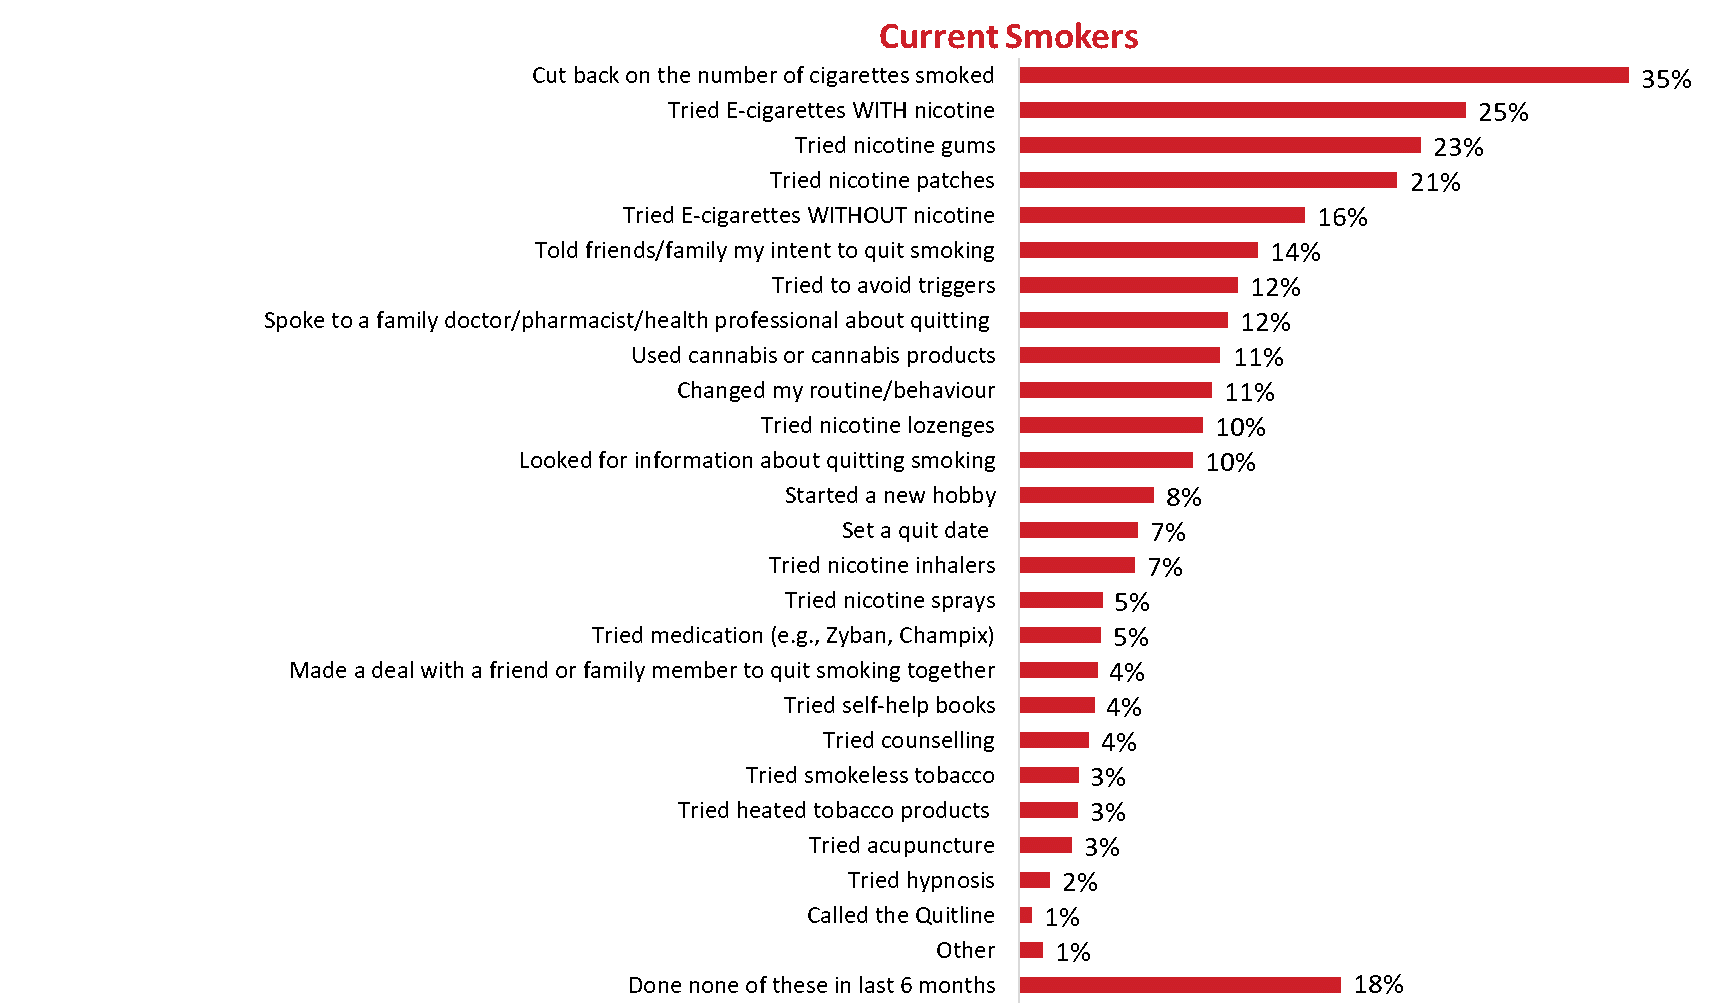 Figure 45: Actions taken to quit [current smokers]